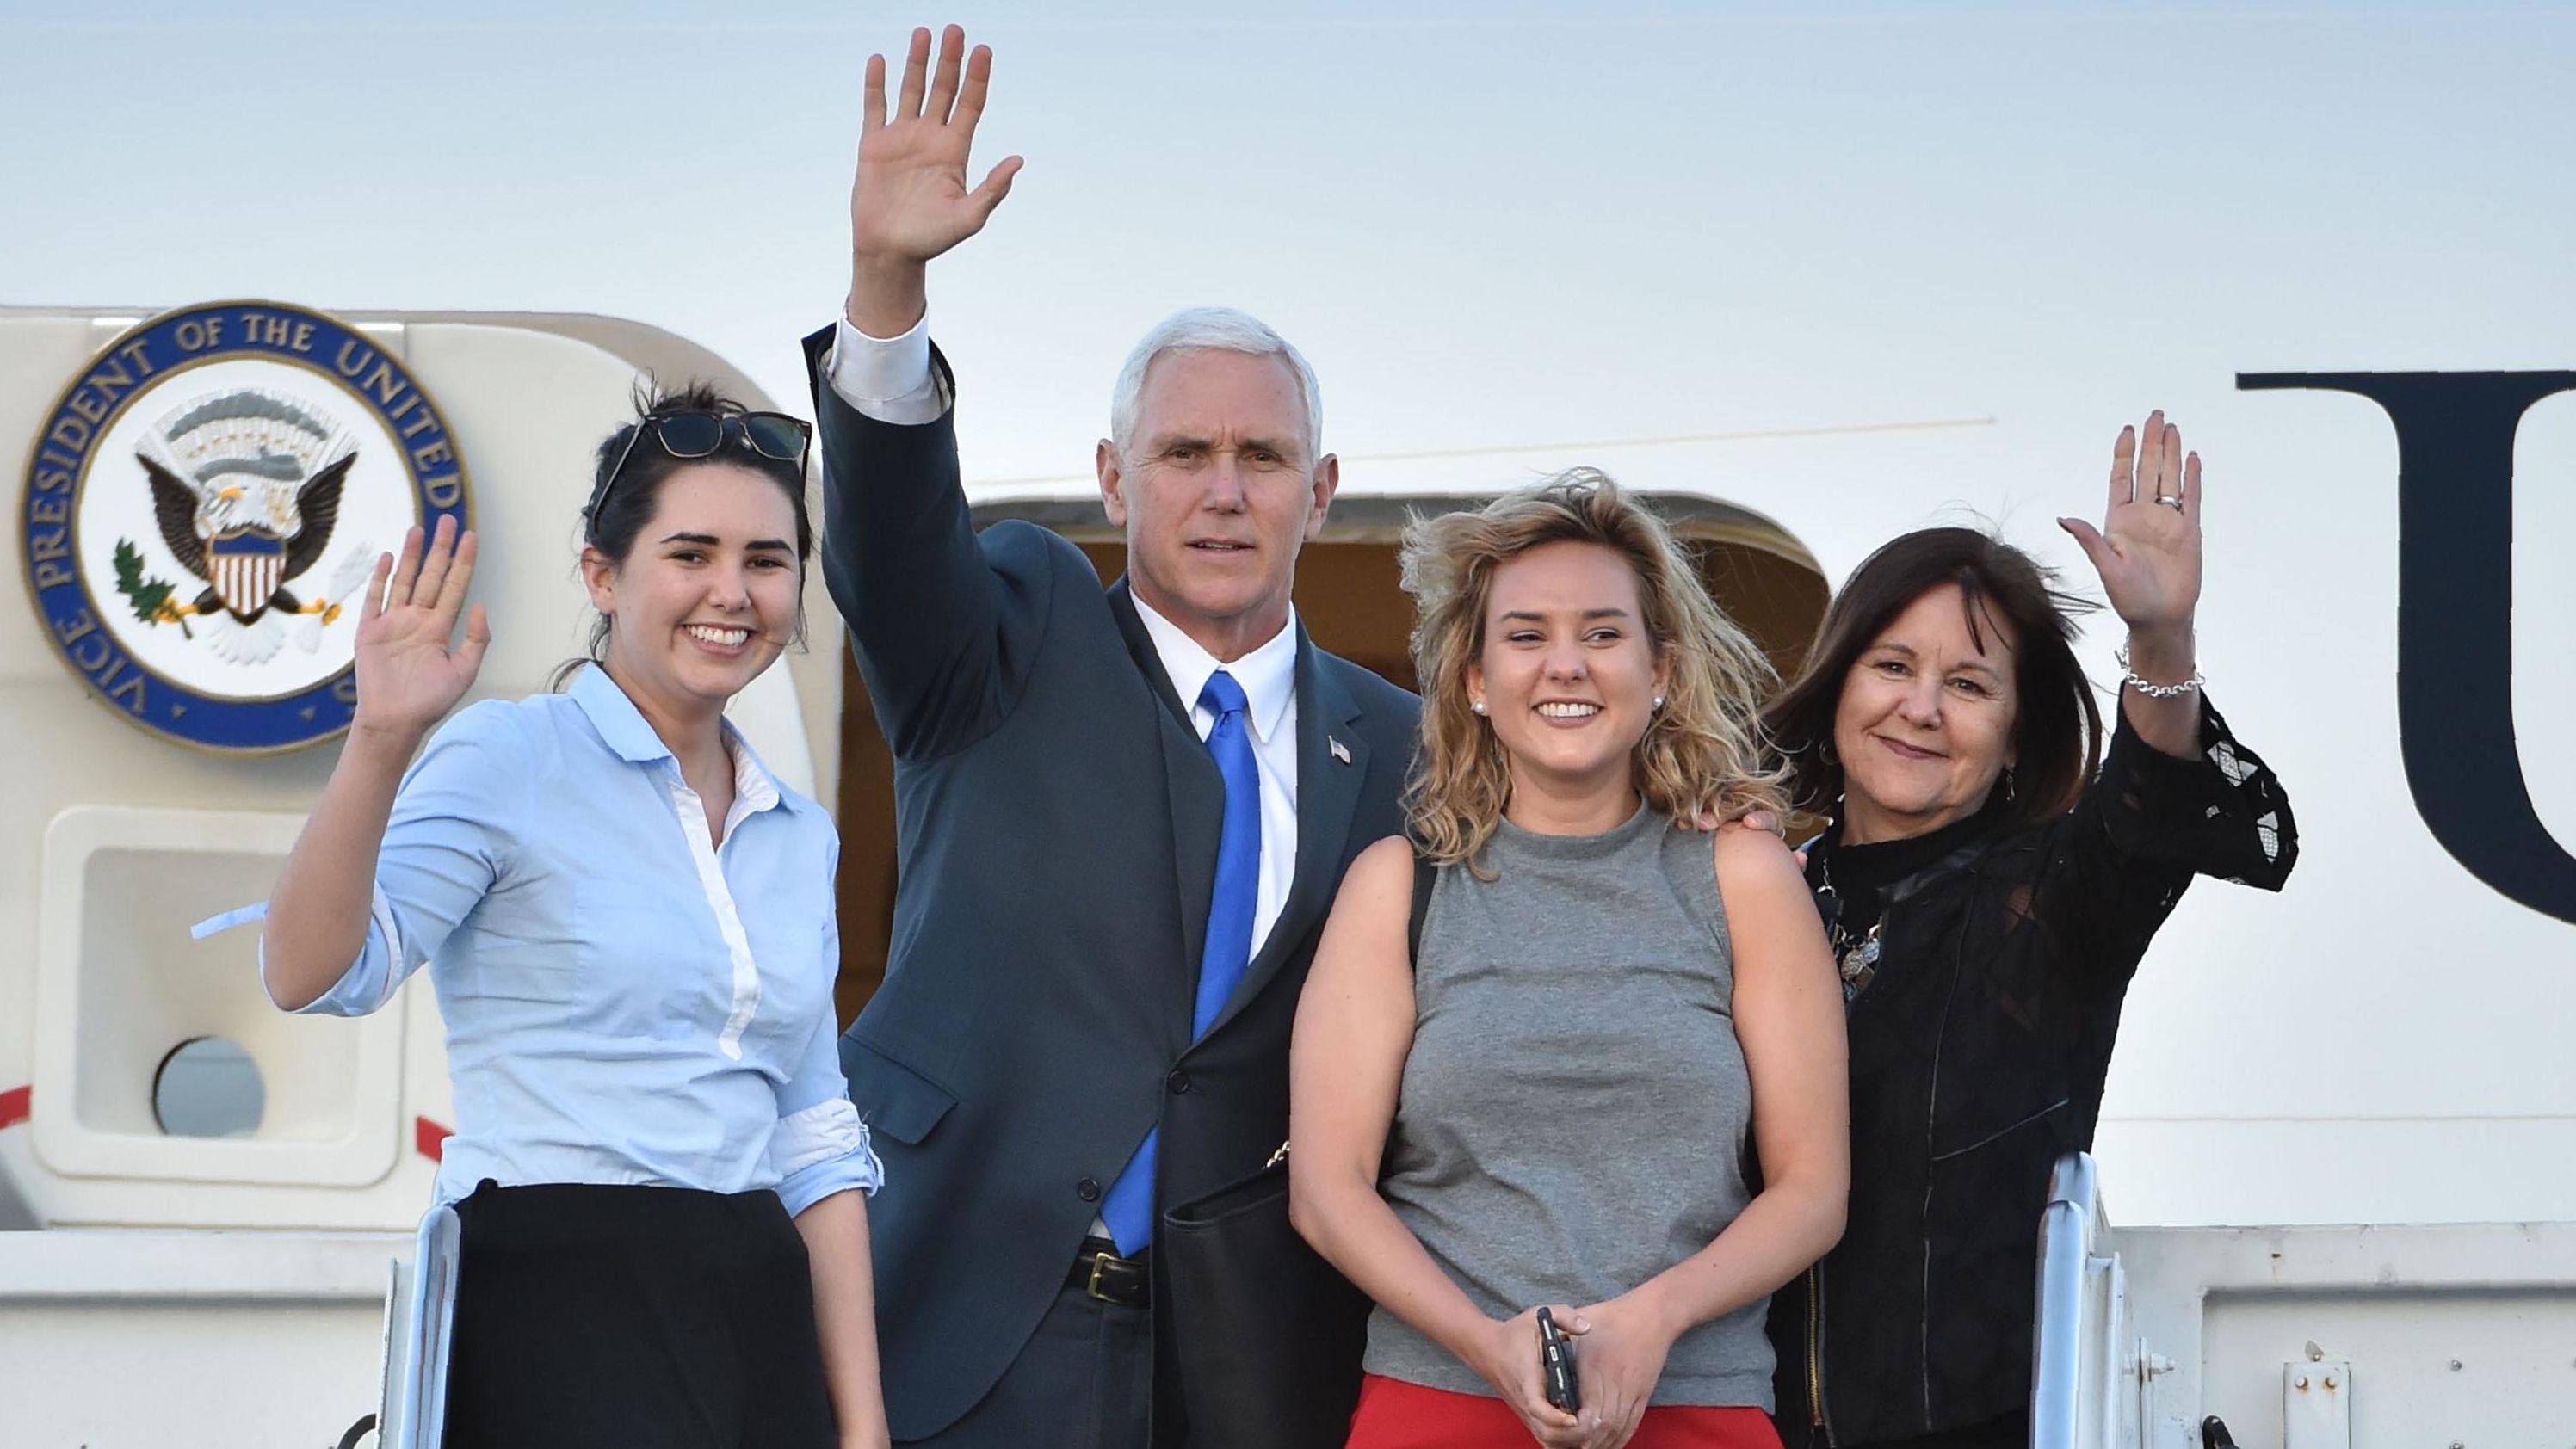 Pence and his wife are joined by their daughters Audrey, left, and Charlotte as they leave Japan in April 2017.